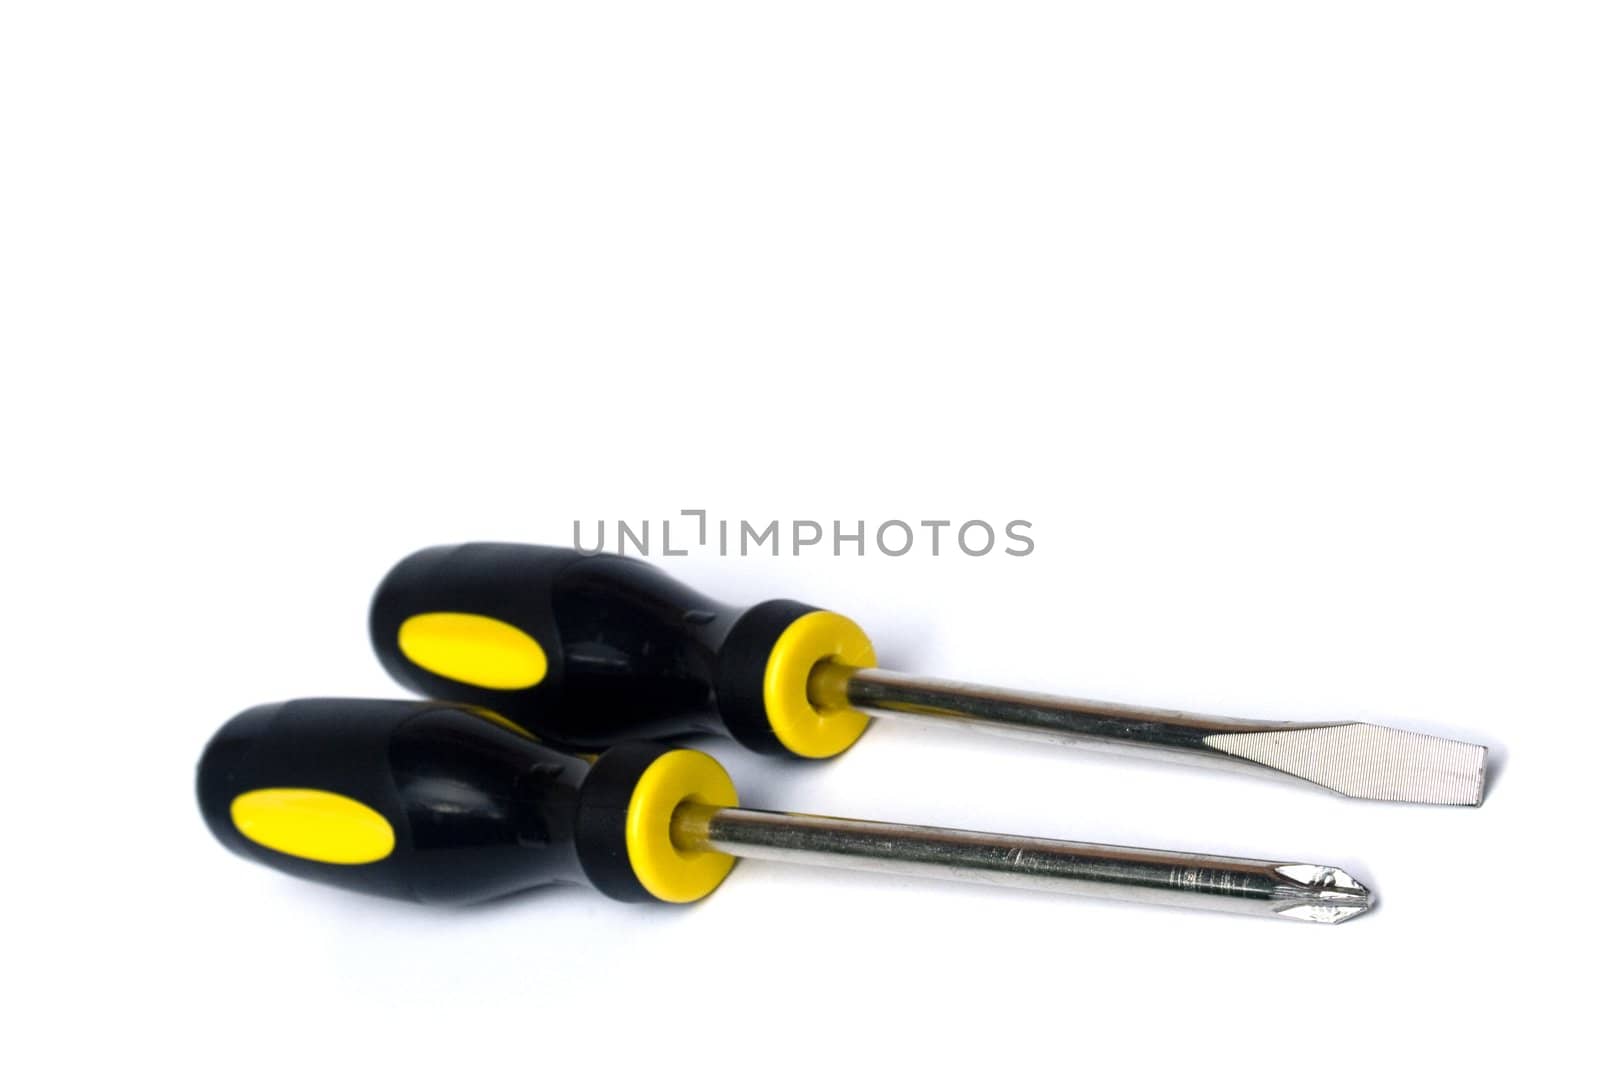 Screwdrivers by timscottrom